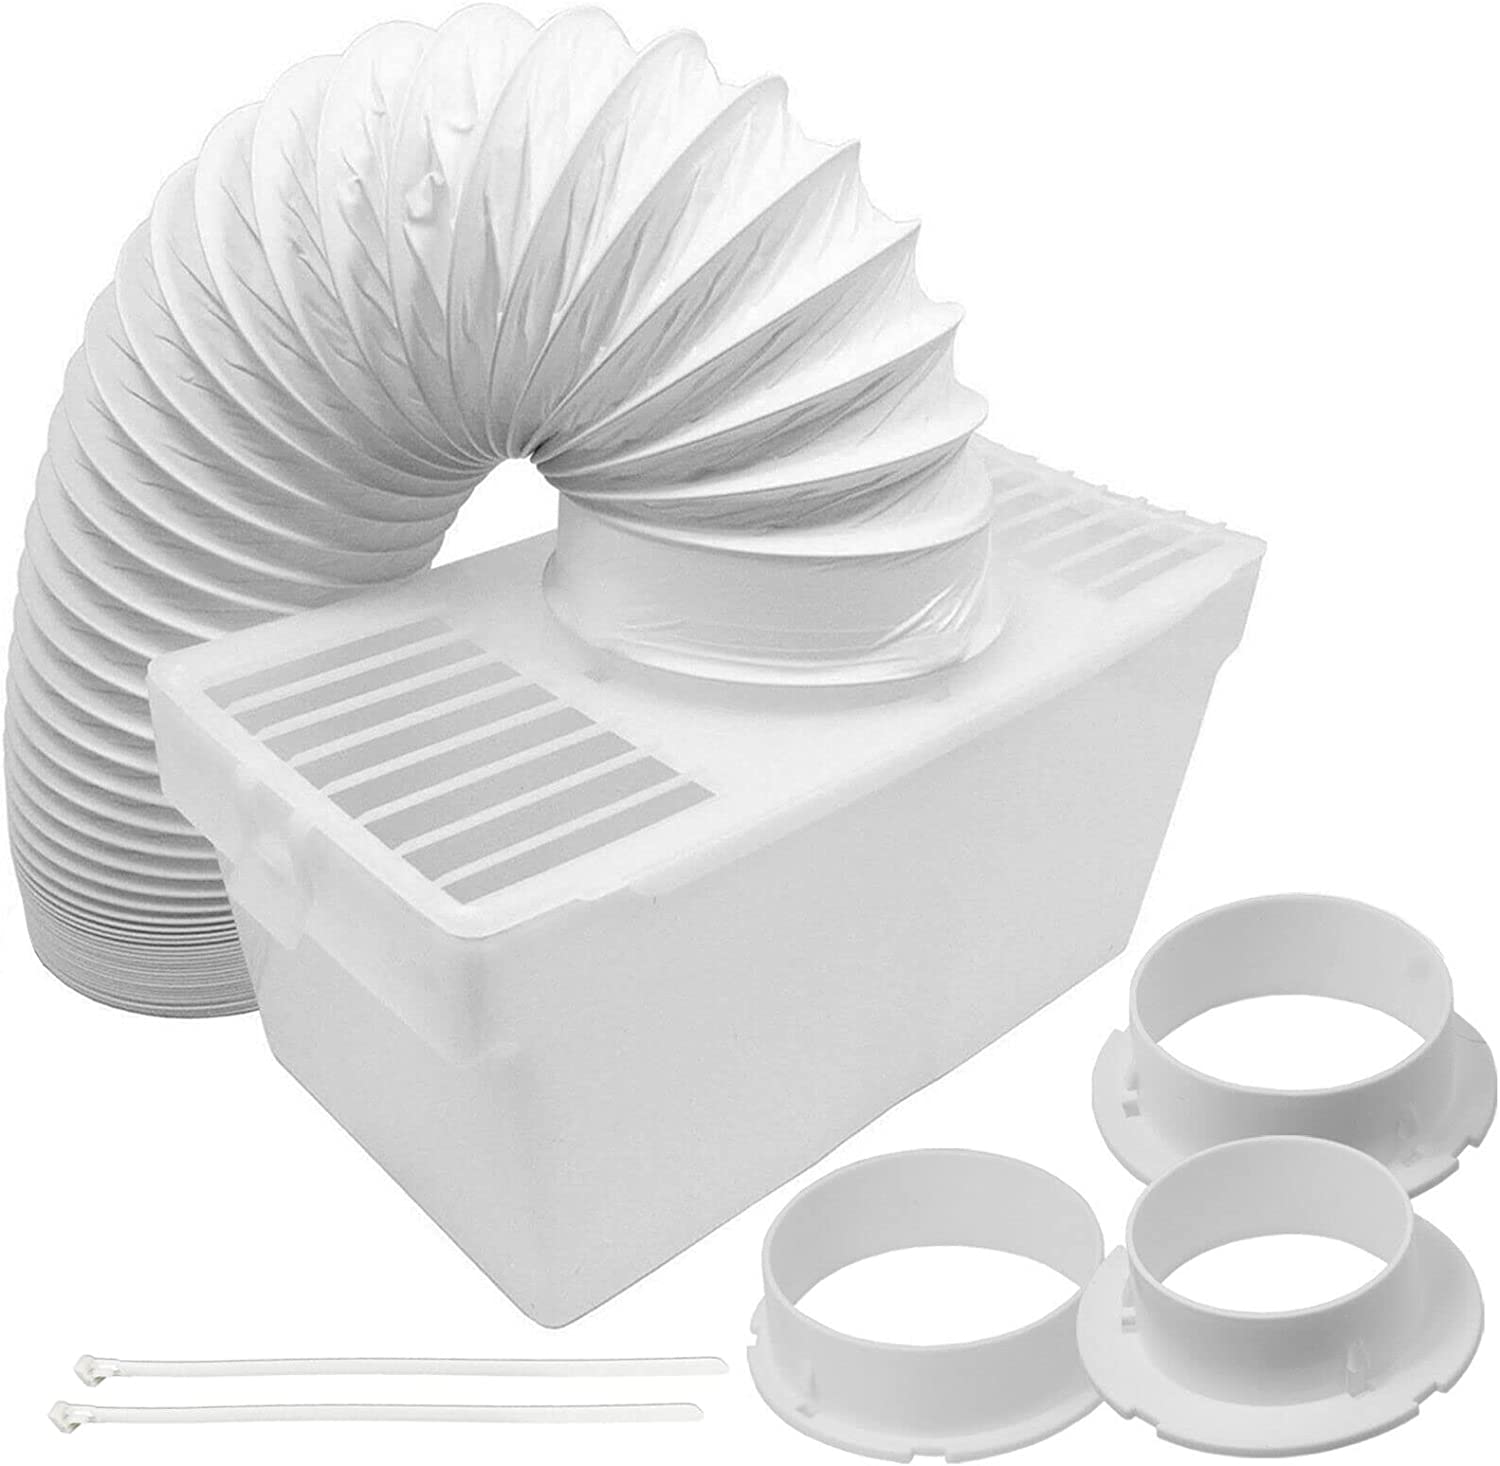 Universal Vent Hose Condenser Kit with 3 x Adapters for Tumble Dryer (1.2m)